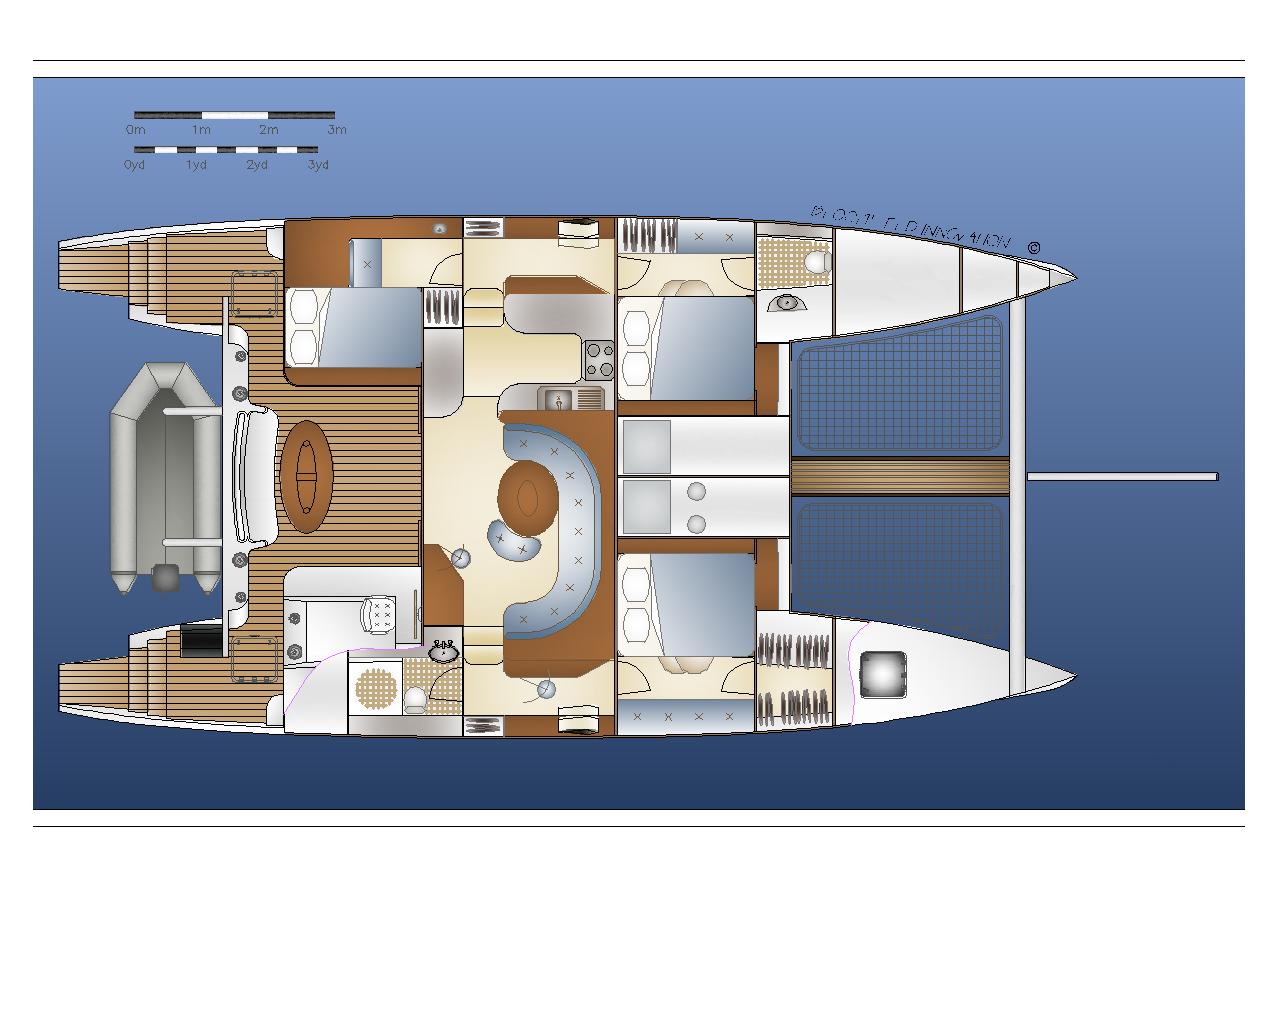 Catamaran Building Plans | How To and DIY Building Plans Online Class 